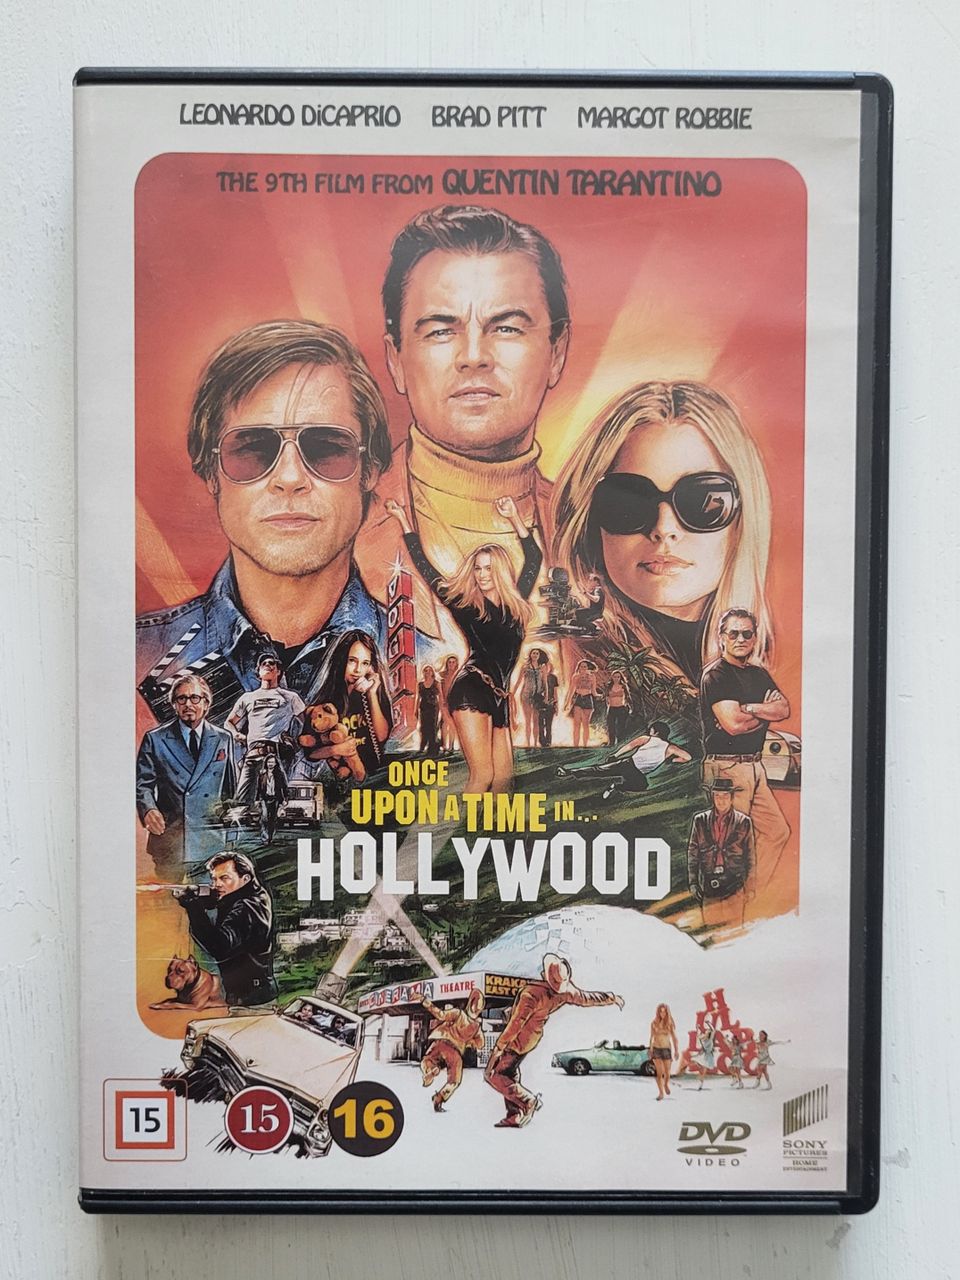 Once Upon Time in Hollywood DVD